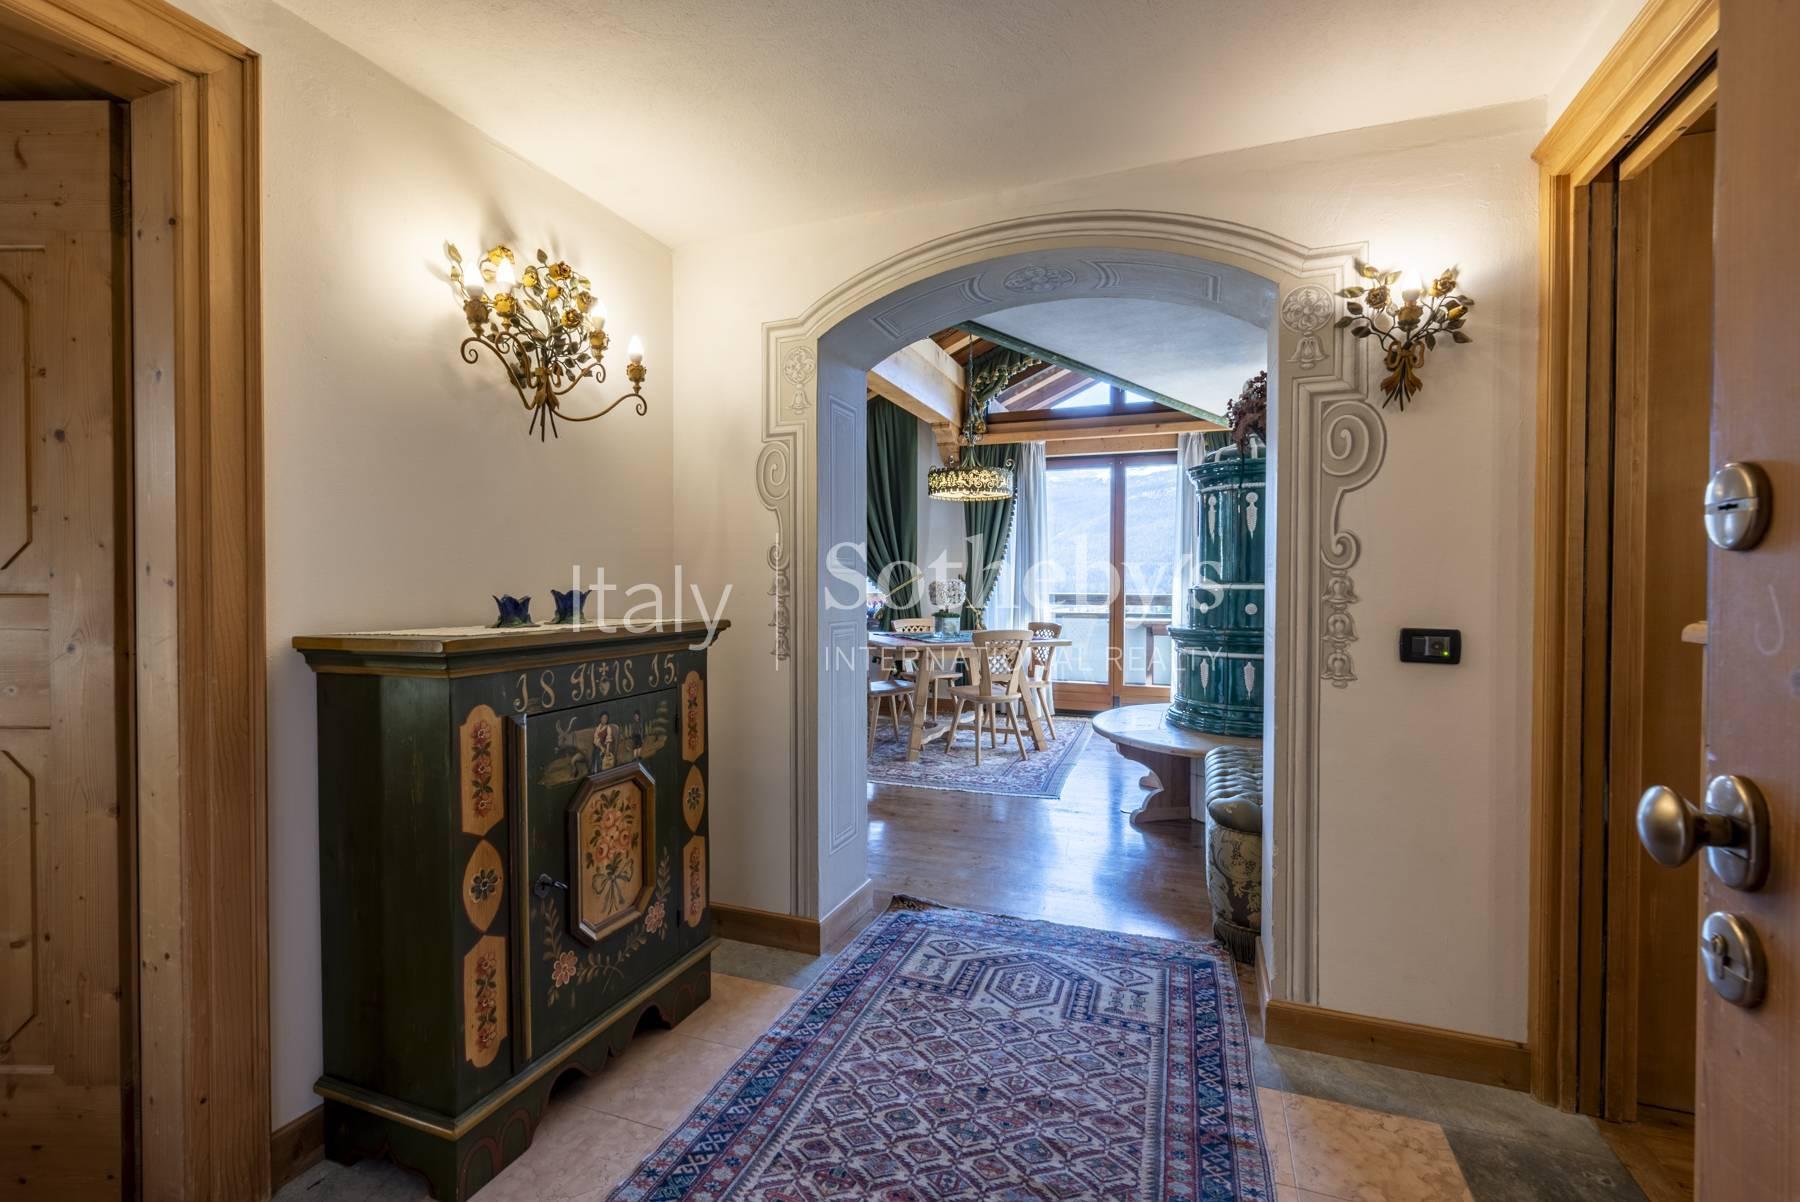 Penthouse with terrace in the heart of Cortina d'Ampezzo - 7